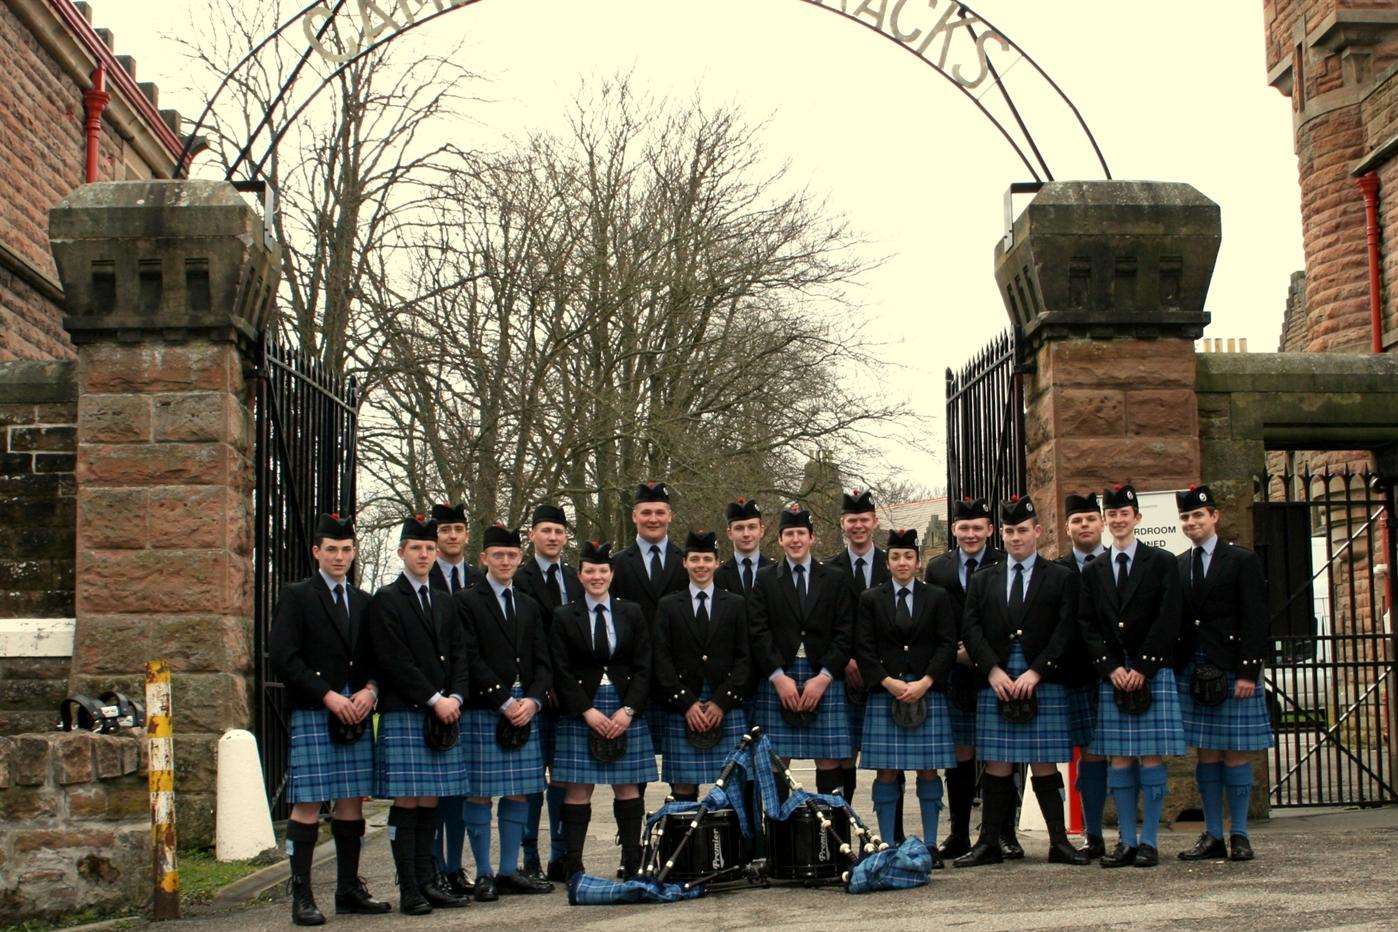 The Band of The Royal Air Force ATC Pipes & Drums 2513 Squadron